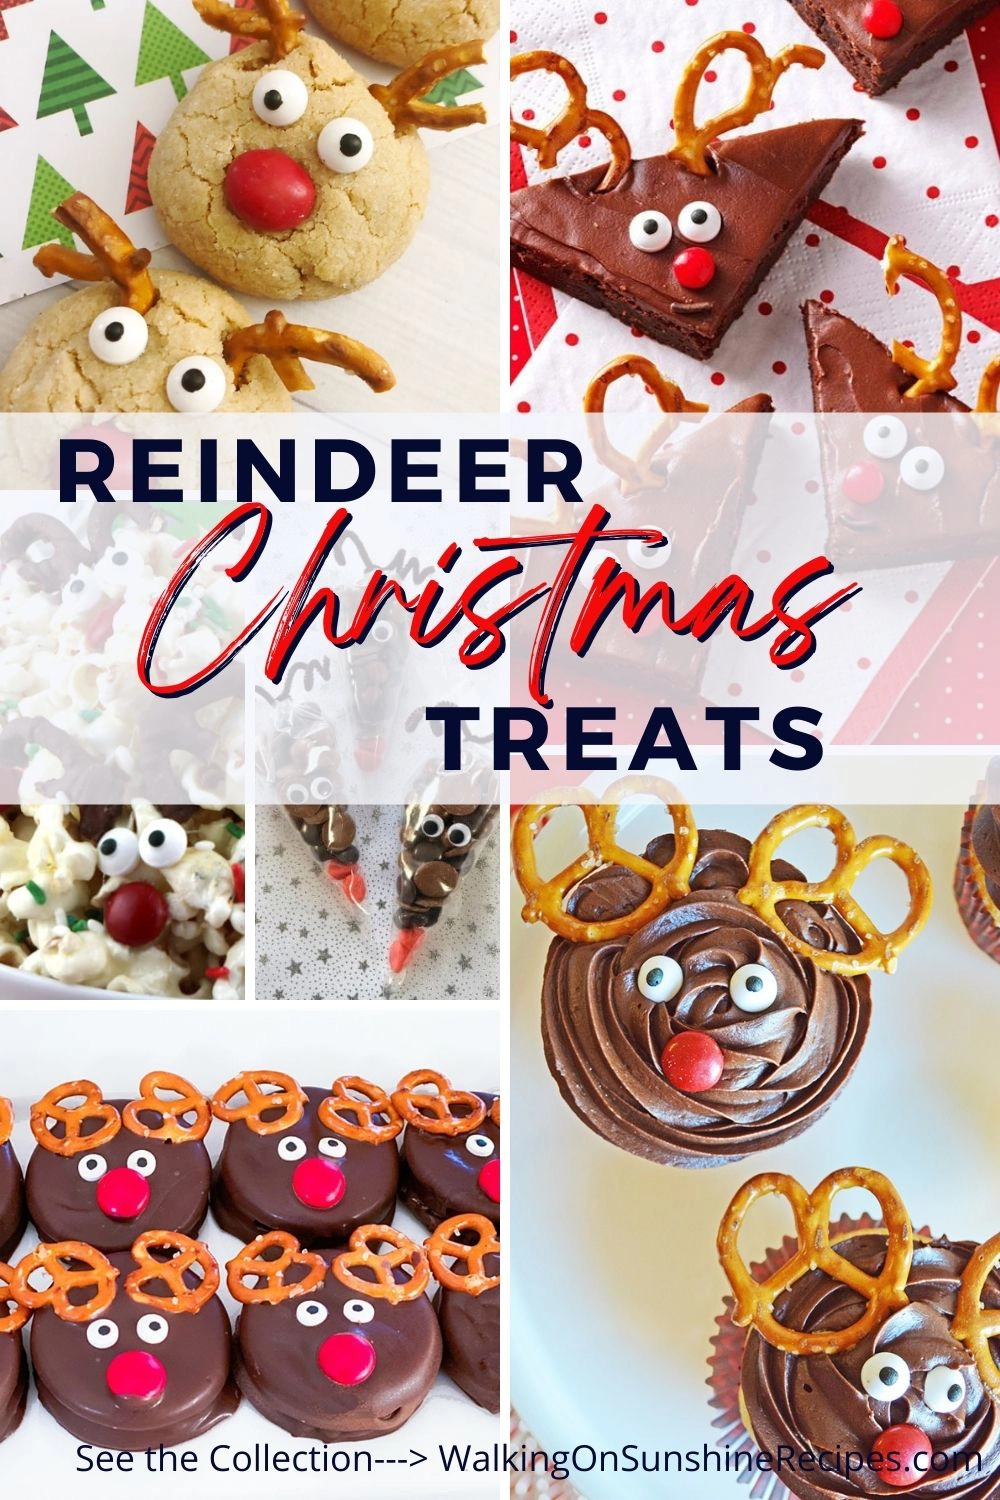 A collection of reindeer treats and desserts for Christmas. 